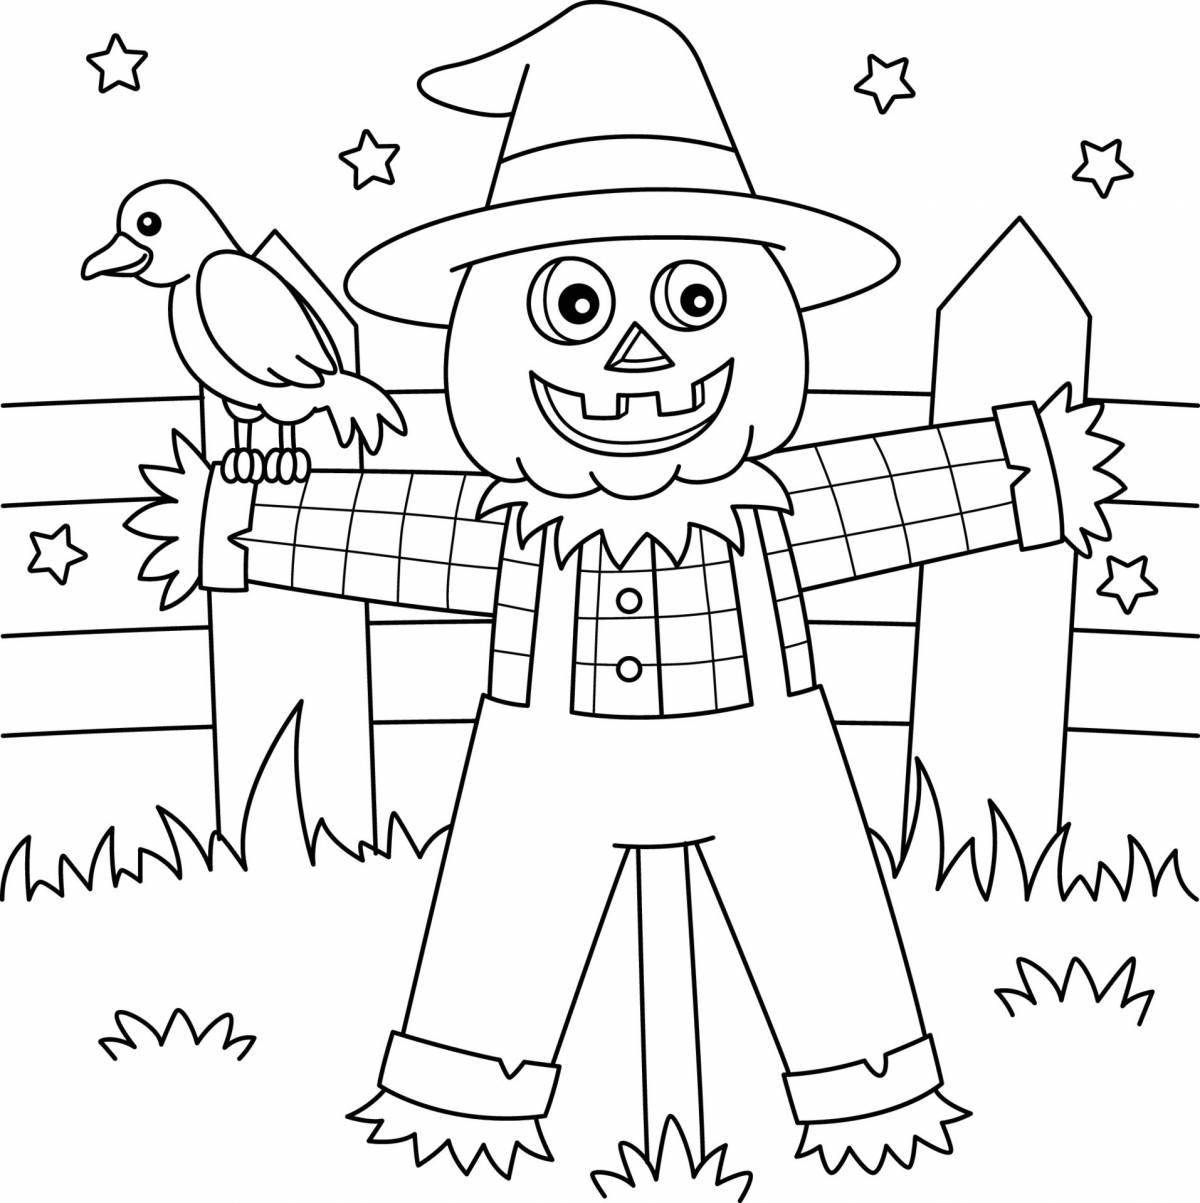 Animated scarecrow coloring page